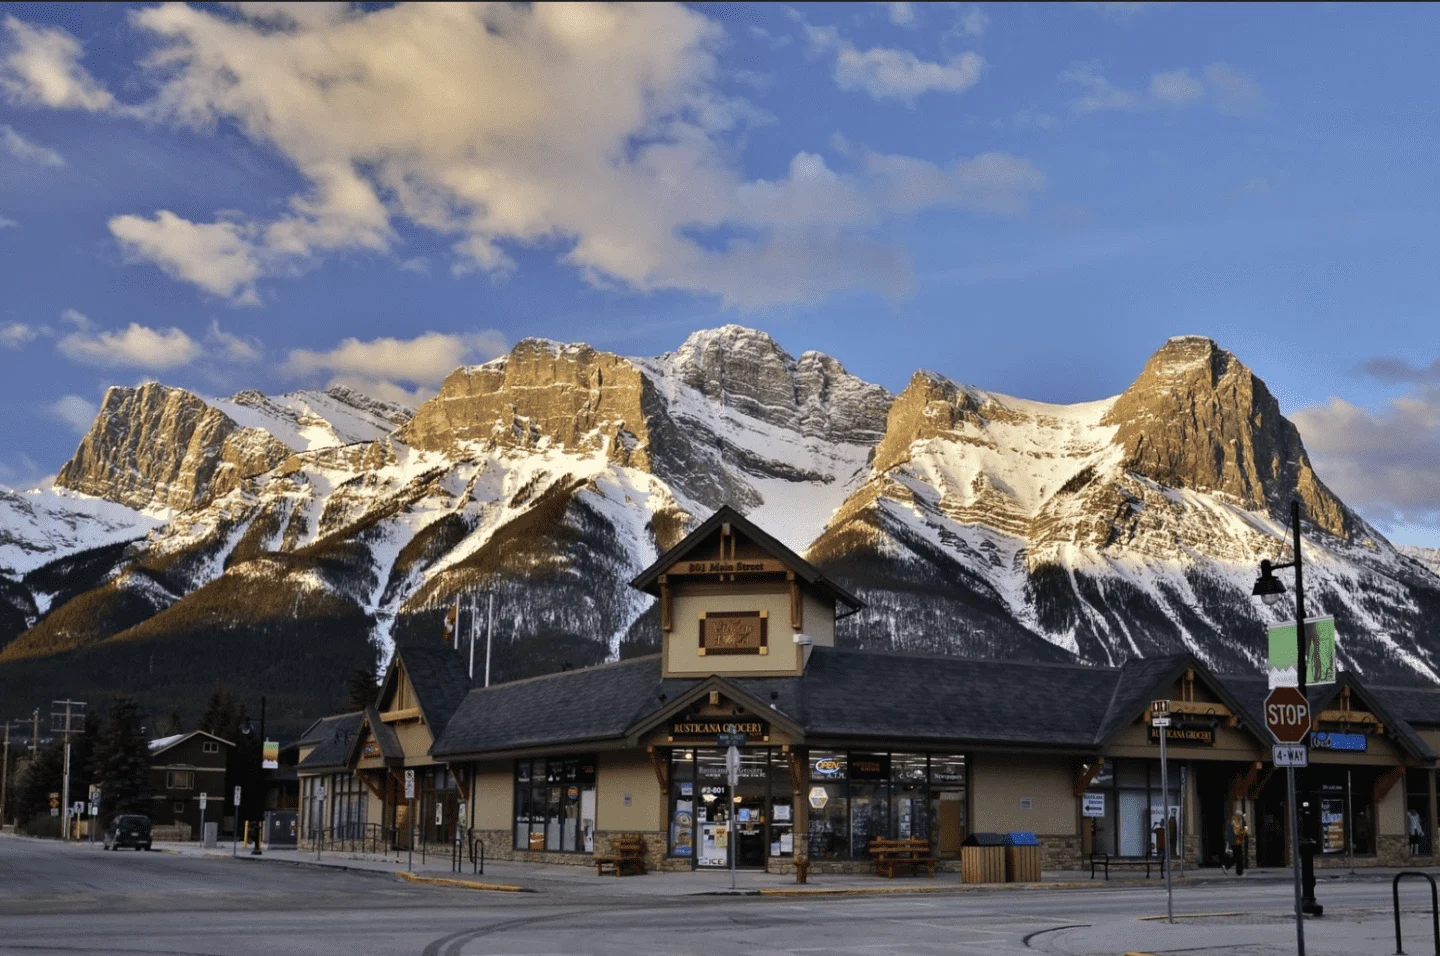 Visiting Banff National Park soon? Don't miss this guide of the 50 best things to in Banff for every kind of traveler! I recently spent 8 days exploring the area and took notes along the way so I could write you the most comprehensive guide possible. This guide includes all the top attractions, hikes, restaurants, and sights you definitely won't want to miss when you visit Banff National Park. I also include any tips you might need when visiting the area! Pictured here: Check out downtown Canmore